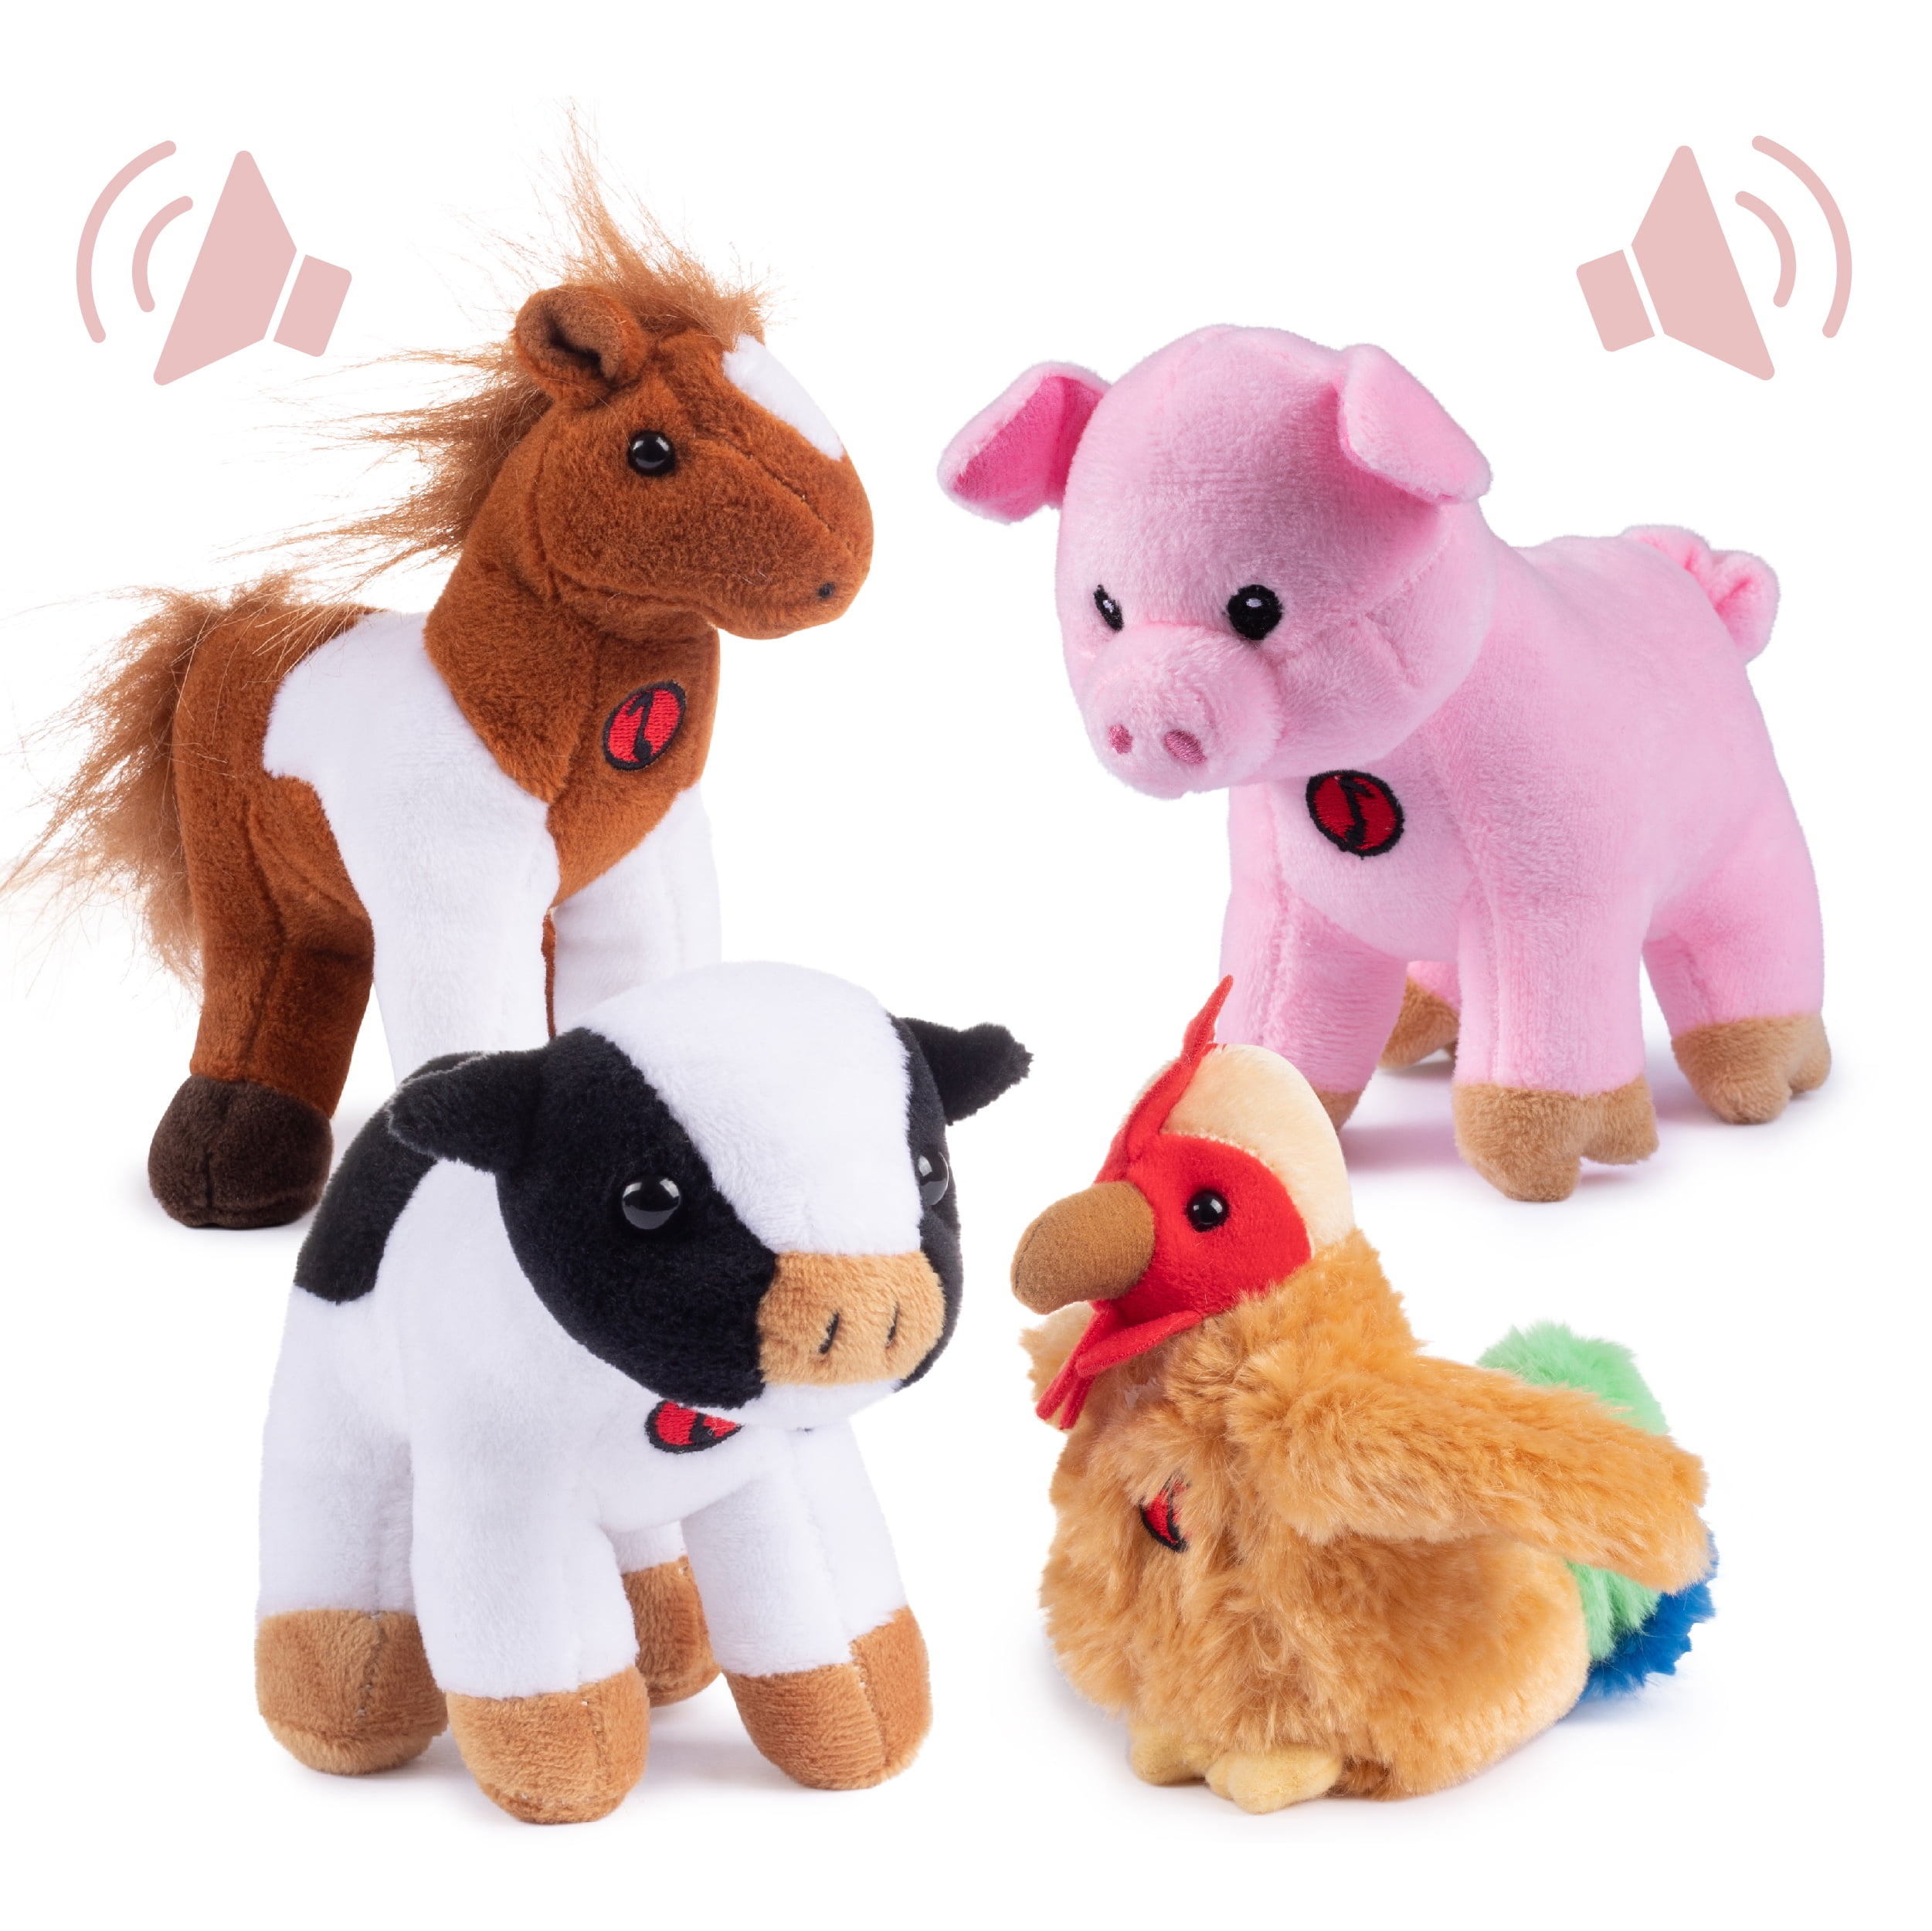 Plush Creations Plush Farm Animals Toys for Toddlers | 4 Plush Talking  Animals | A Cow, a Horse, a Rooster, & a Pig 